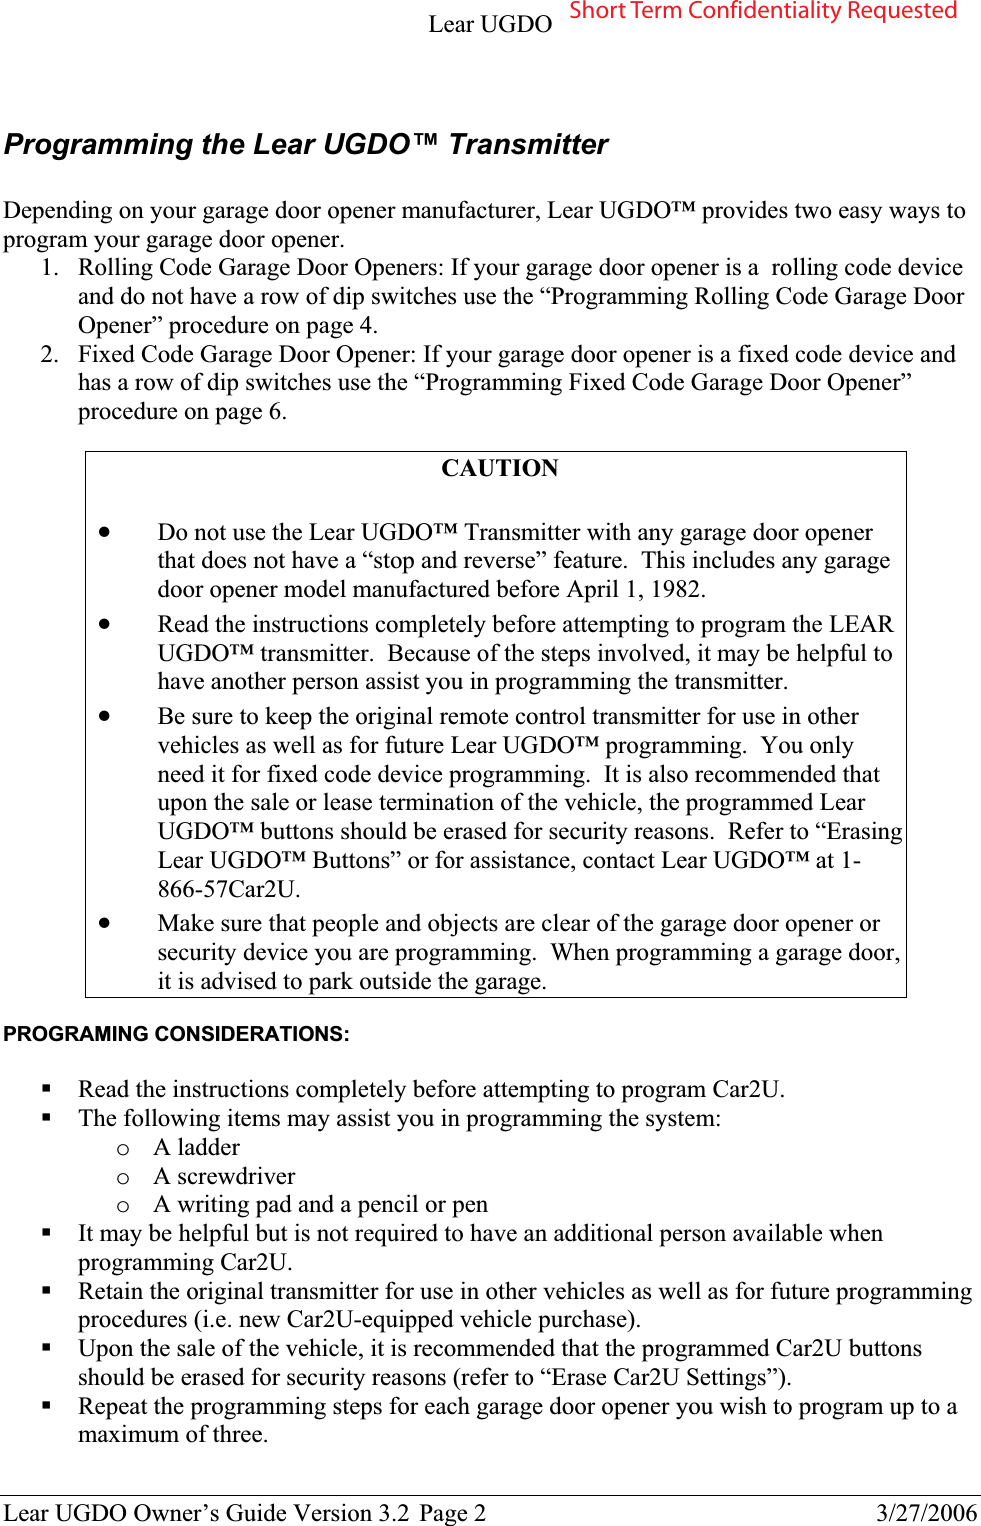 Lear UGDO Lear UGDO Owner’s Guide Version 3.2  Page 2  3/27/2006 Programming the Lear UGDO™ Transmitter Depending on your garage door opener manufacturer, Lear UGDO™ provides two easy ways to program your garage door opener. 1. Rolling Code Garage Door Openers: If your garage door opener is a  rolling code device and do not have a row of dip switches use the “Programming Rolling Code Garage Door Opener” procedure on page 4. 2. Fixed Code Garage Door Opener: If your garage door opener is a fixed code device and has a row of dip switches use the “Programming Fixed Code Garage Door Opener” procedure on page 6. CAUTIONxDo not use the Lear UGDO™ Transmitter with any garage door opener that does not have a “stop and reverse” feature. This includes any garage door opener model manufactured before April 1, 1982.   xRead the instructions completely before attempting to program the LEAR UGDO™ transmitter.  Because of the steps involved, it may be helpful to have another person assist you in programming the transmitter. xBe sure to keep the original remote control transmitter for use in other vehicles as well as for future Lear UGDO™ programming.  You only need it for fixed code device programming.  It is also recommended that upon the sale or lease termination of the vehicle, the programmed Lear UGDO™ buttons should be erased for security reasons.  Refer to “Erasing Lear UGDO™ Buttons” or for assistance, contact Lear UGDO™ at 1-866-57Car2U.xMake sure that people and objects are clear of the garage door opener or security device you are programming.  When programming a garage door, it is advised to park outside the garage. PROGRAMING CONSIDERATIONS: Read the instructions completely before attempting to program Car2U.   The following items may assist you in programming the system: oA ladder oA screwdriver oA writing pad and a pencil or penIt may be helpful but is not required to have an additional person available when programming Car2U. Retain the original transmitter for use in other vehicles as well as for future programming procedures (i.e. new Car2U-equipped vehicle purchase).Upon the sale of the vehicle, it is recommended that the programmed Car2U buttons should be erased for security reasons (refer to “Erase Car2U Settings”). Repeat the programming steps for each garage door opener you wish to program up to a maximum of three.  Short Term Confidentiality Requested